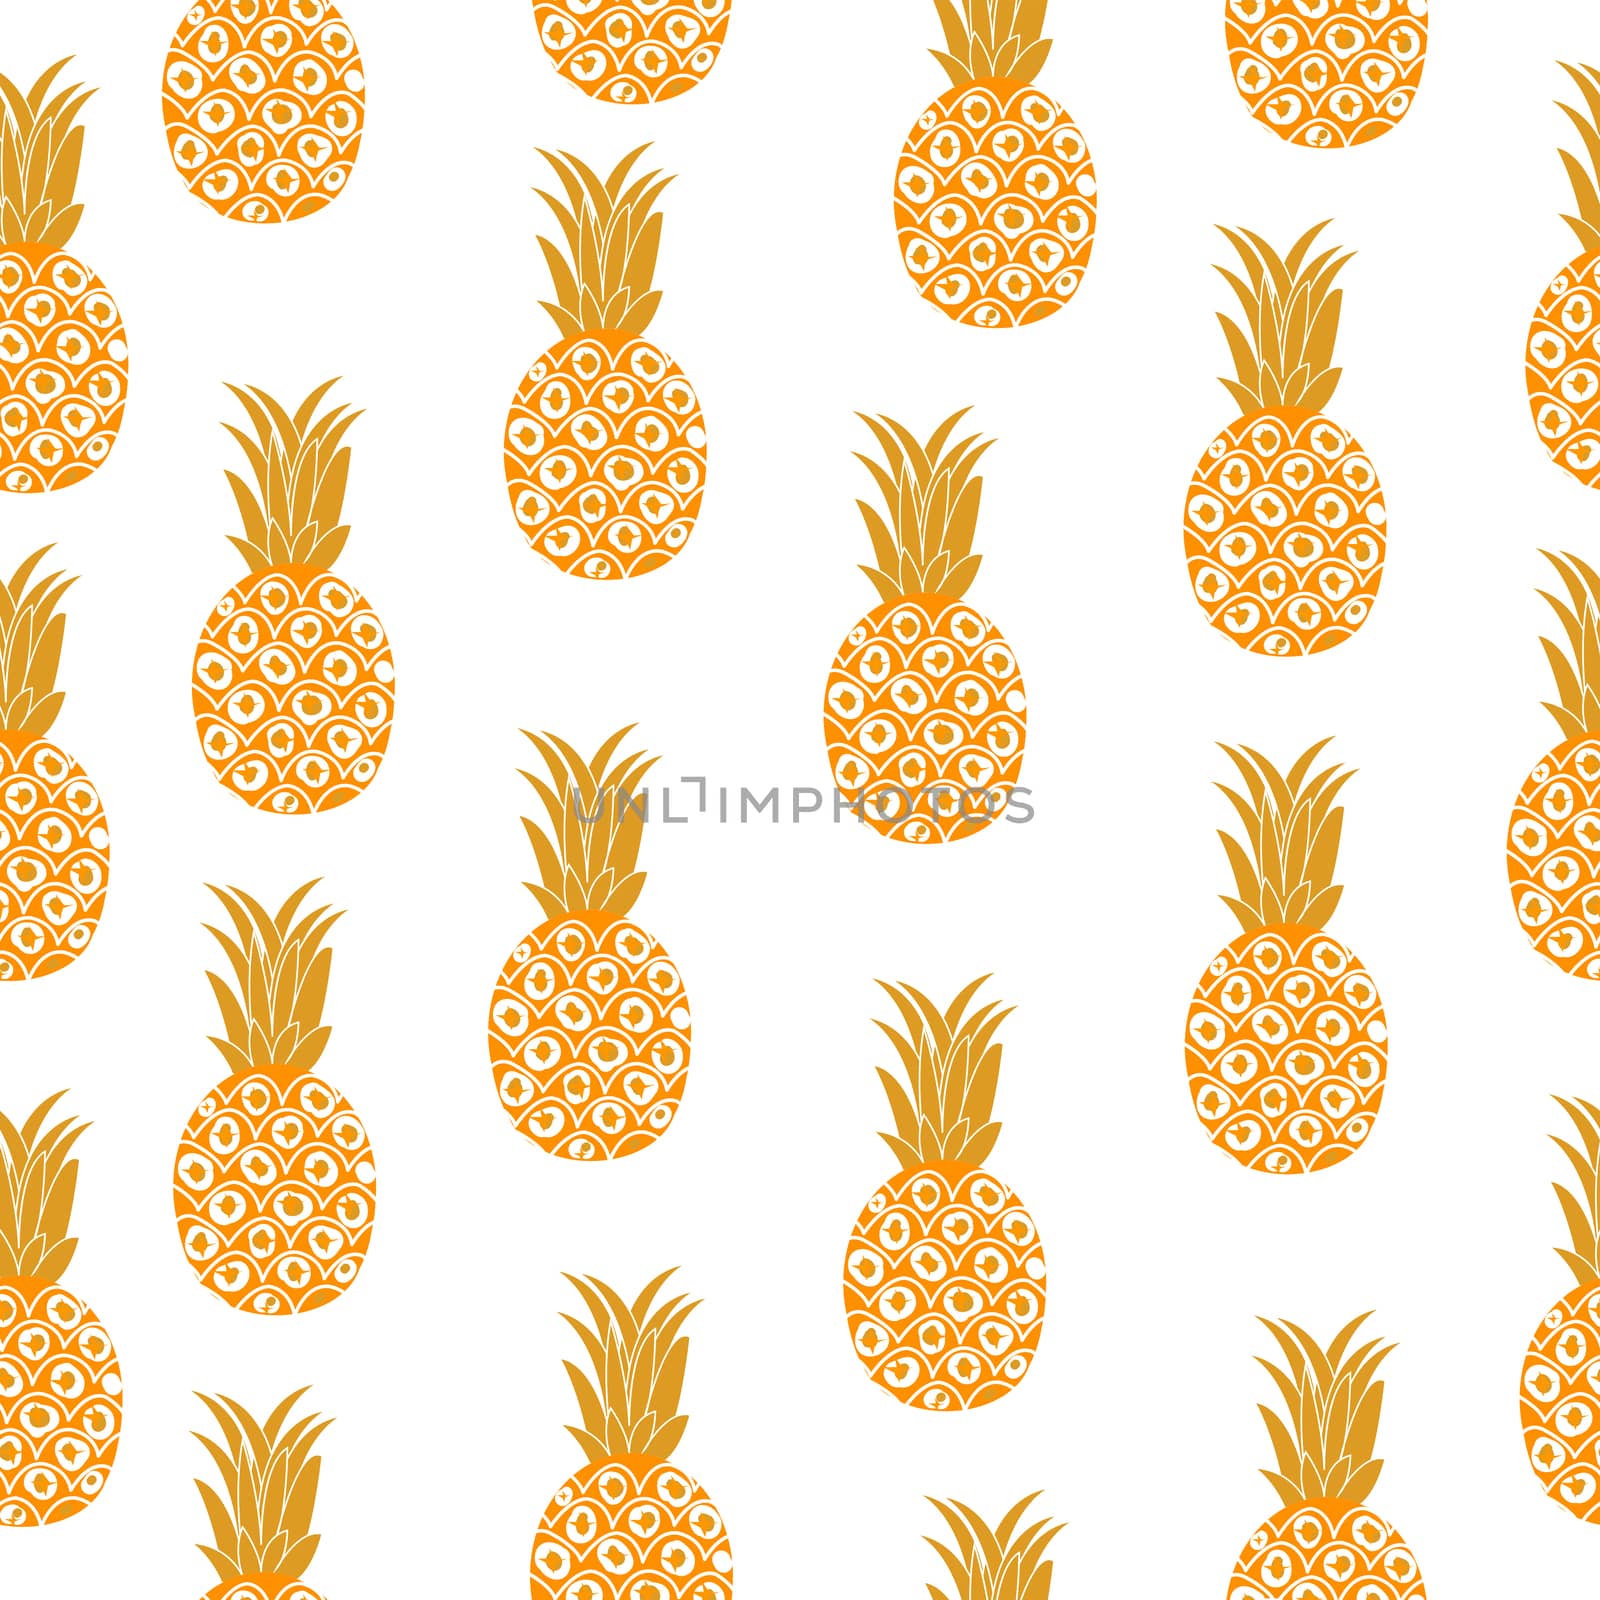 Pineapple seamless texture. Pineapple background, wallpaper, fabric. illustration. by lucia_fox